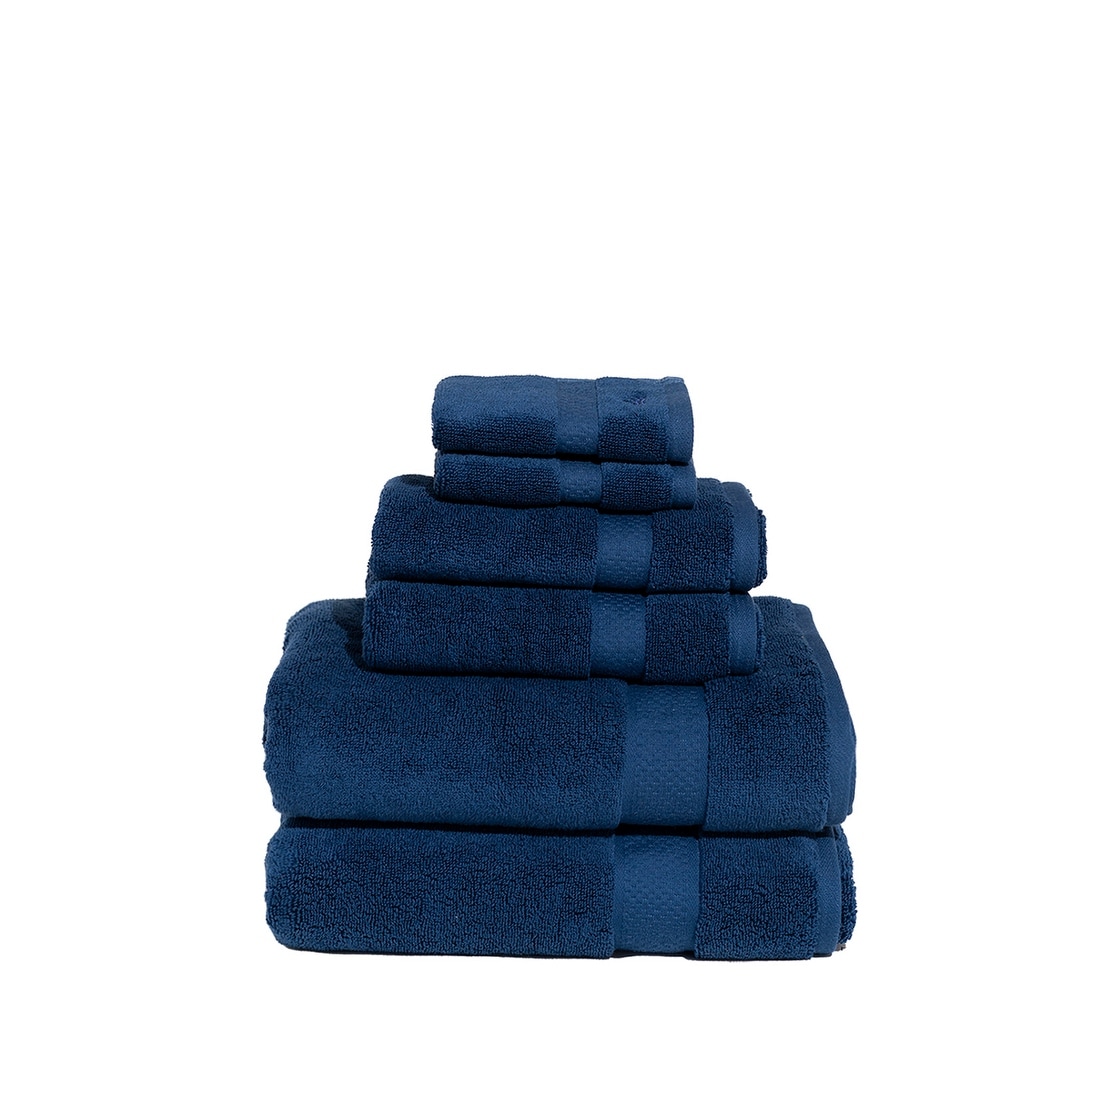 https://ak1.ostkcdn.com/images/products/is/images/direct/105aaa6eca26876b2231c901023528fd9ae79c07/Royal-Velvet-Signature-Solid-6-Piece-Towel-Set.jpg